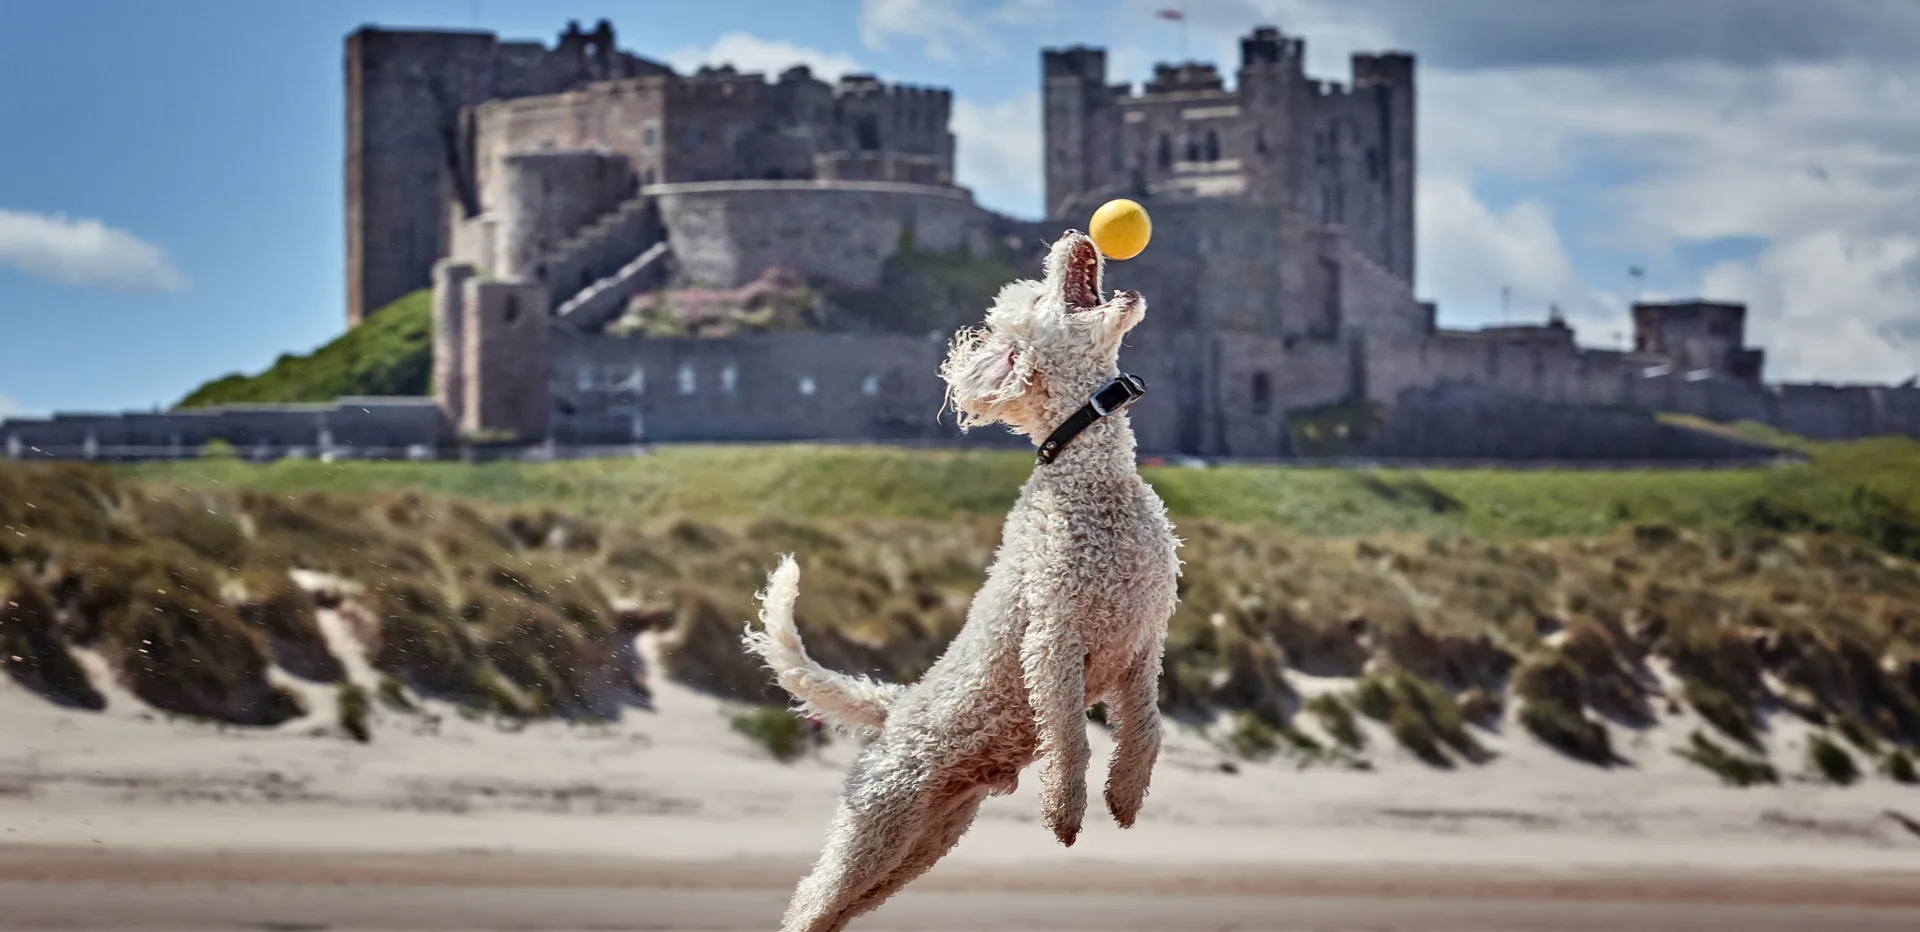 Dog friendly cottages in Northumberland